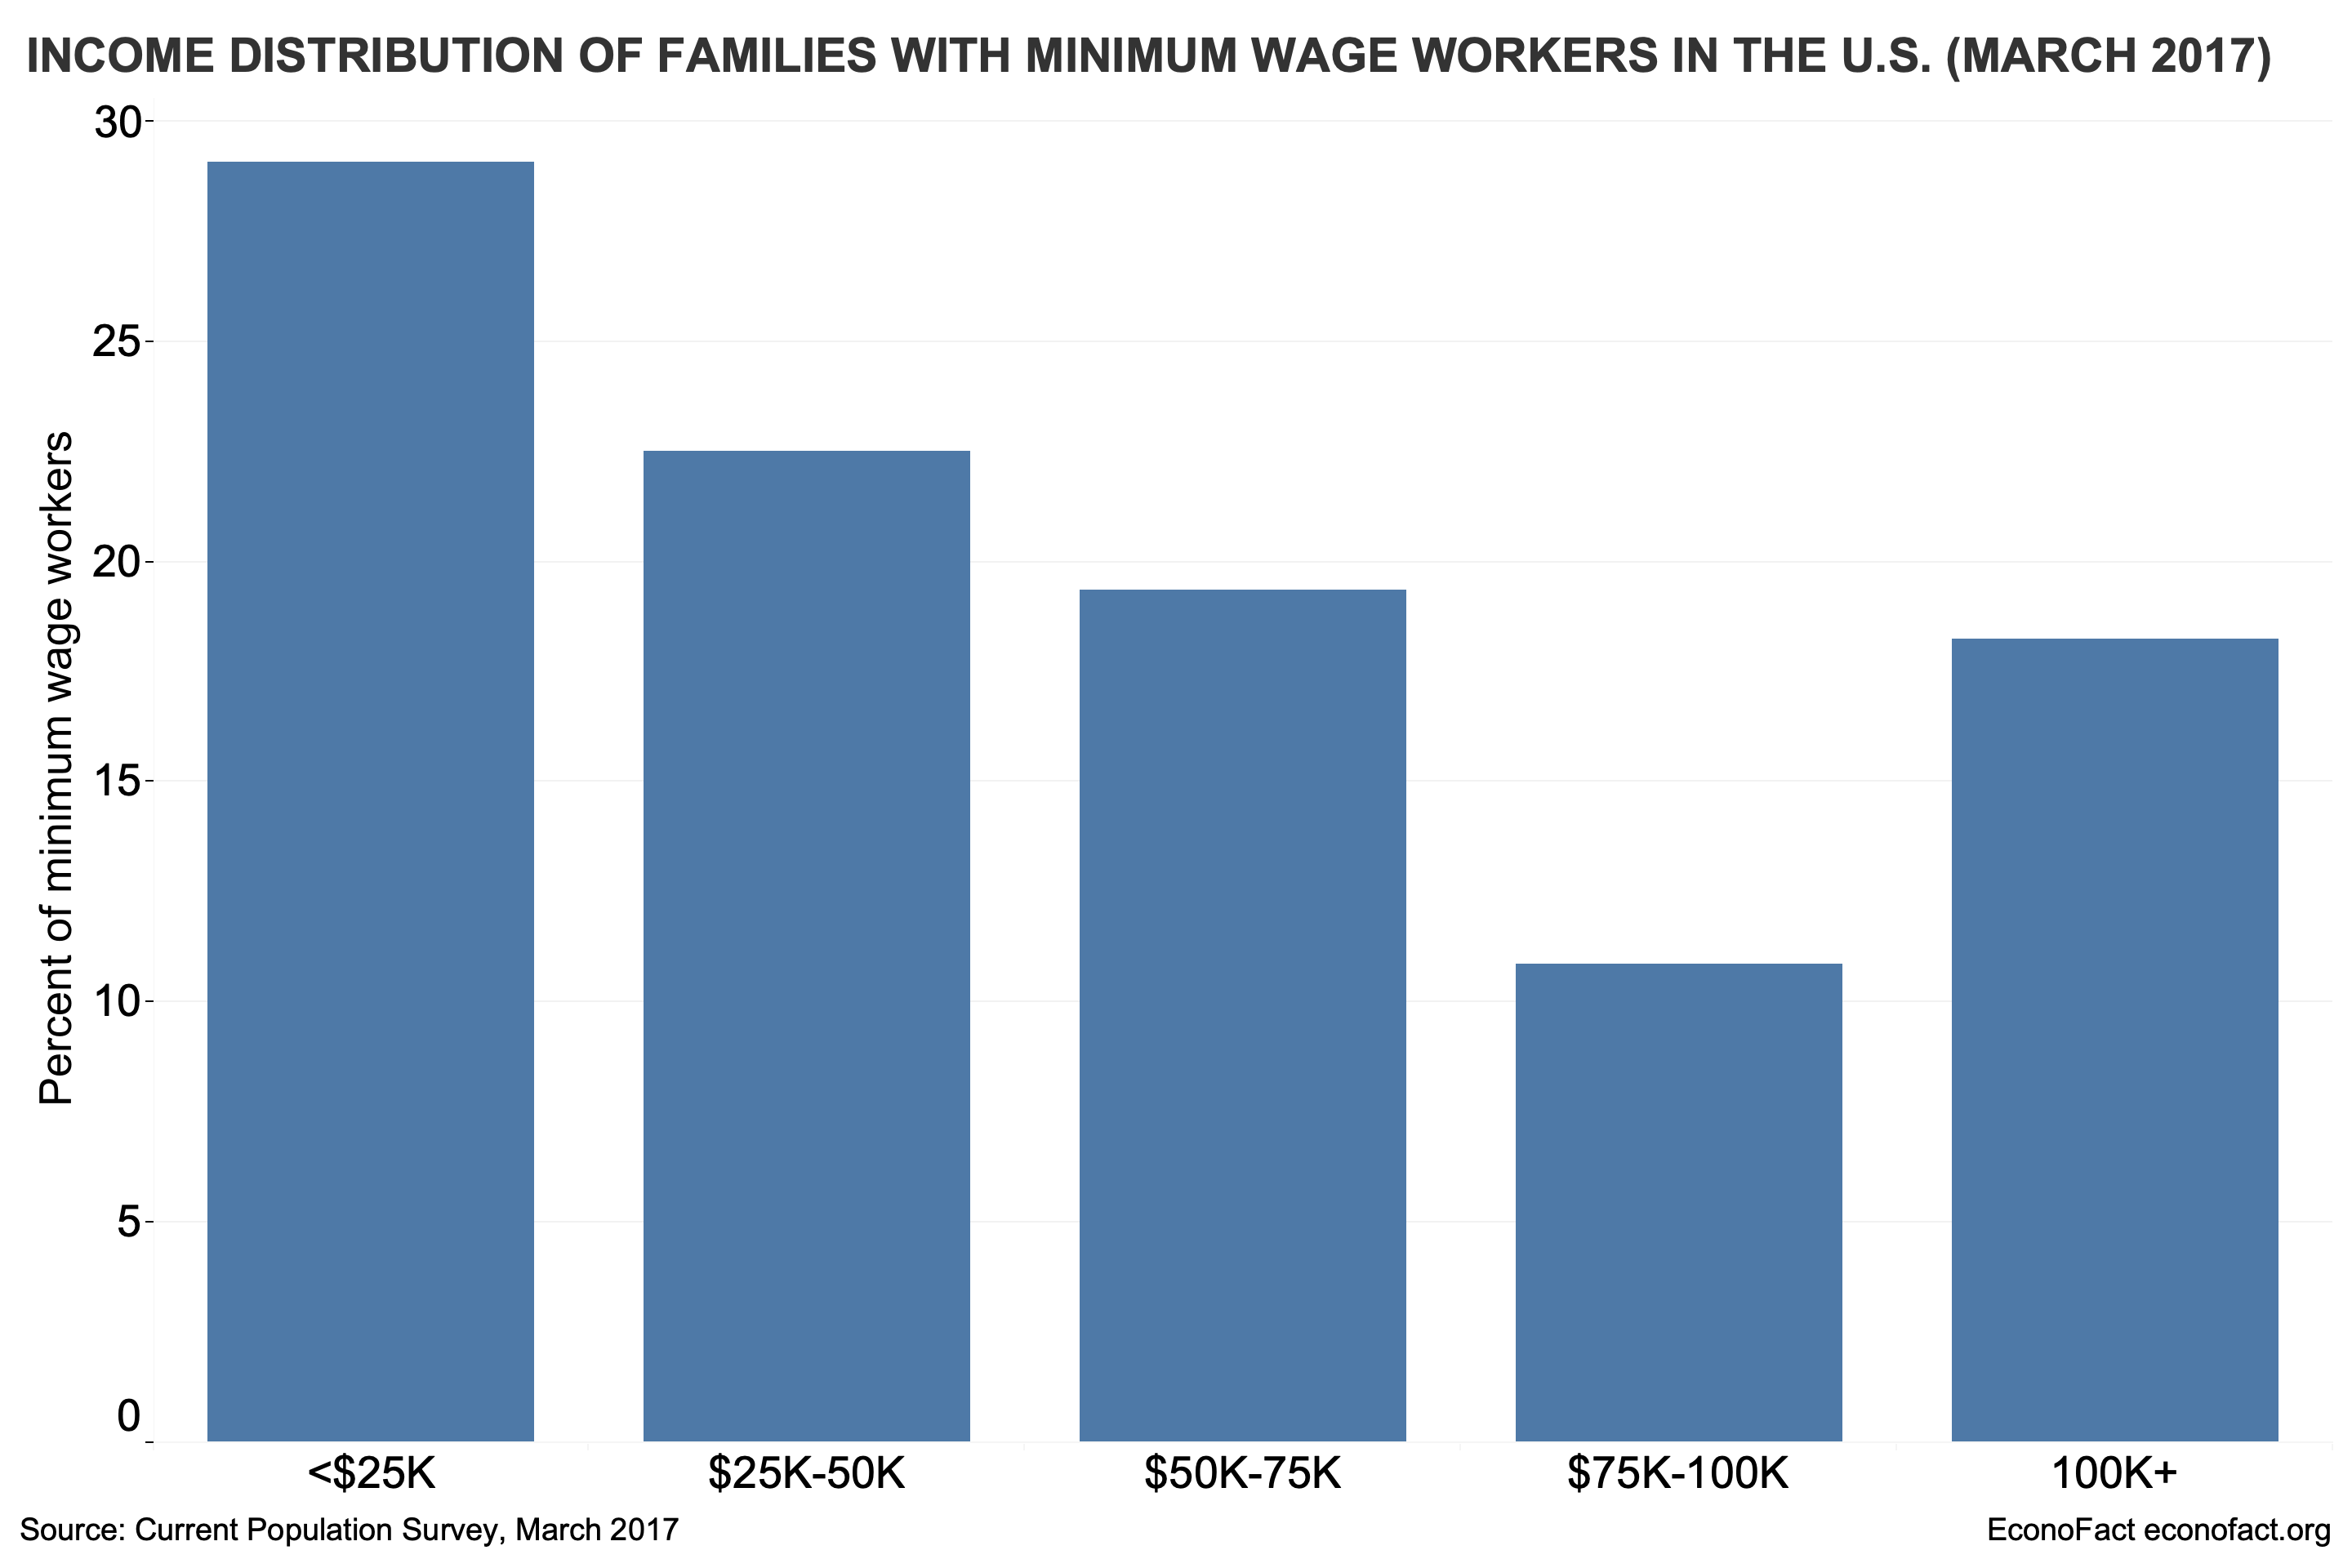 Who Benefits from a Higher Minimum Wage?